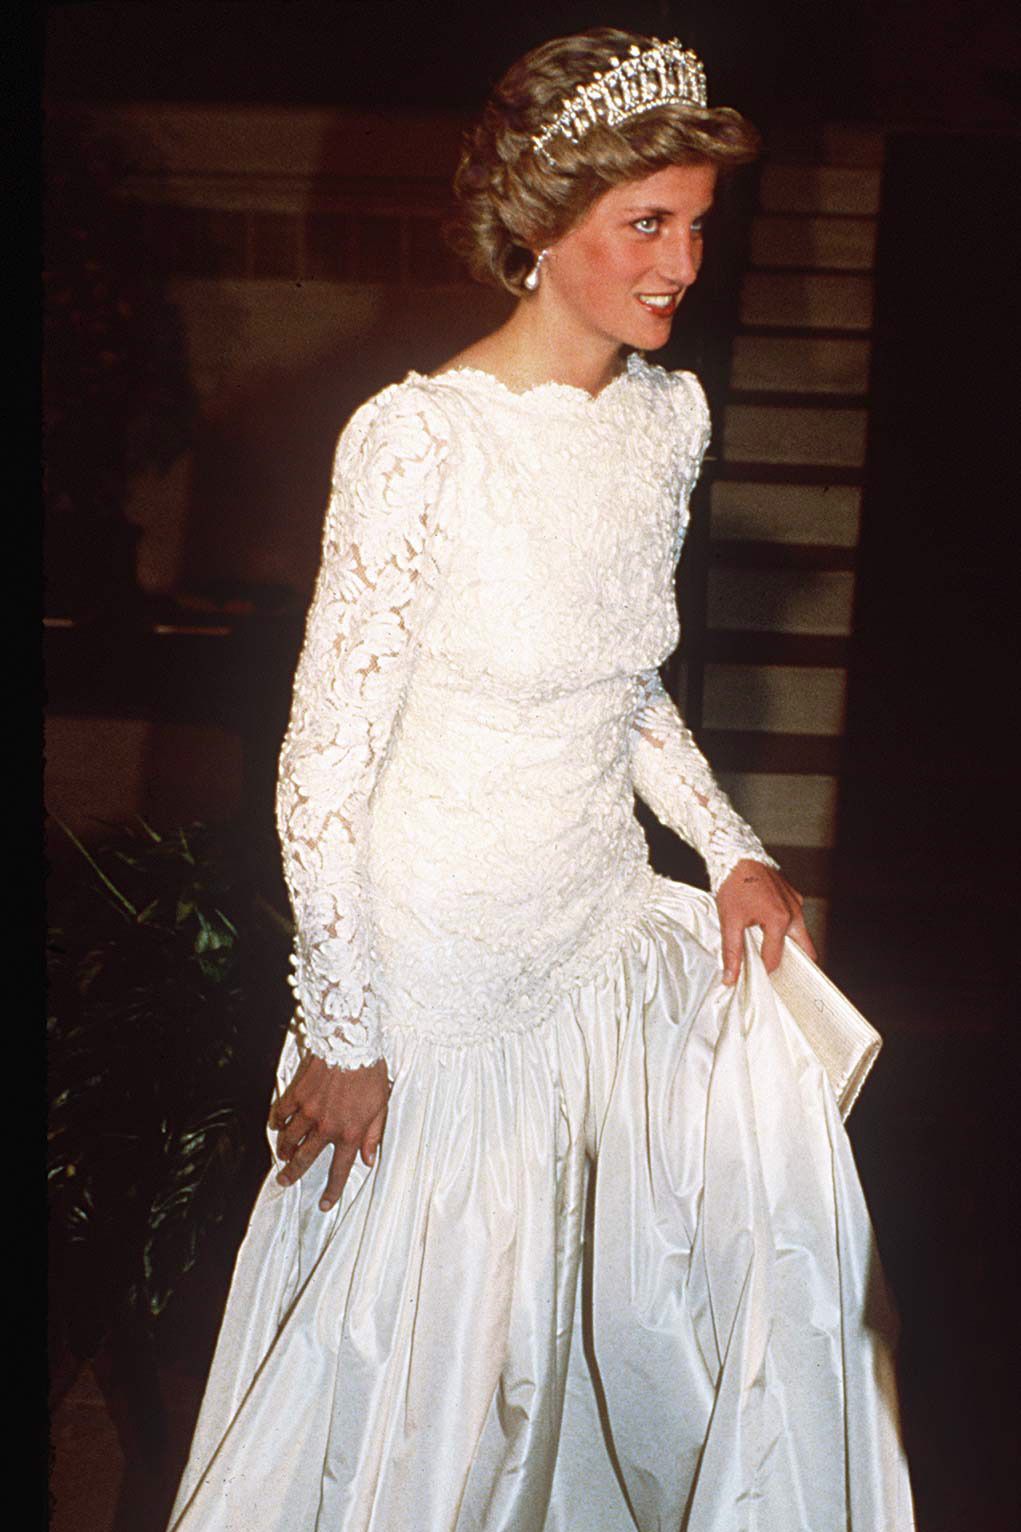 Tiaras, gowns, power suits: Princess Diana's fashion moments